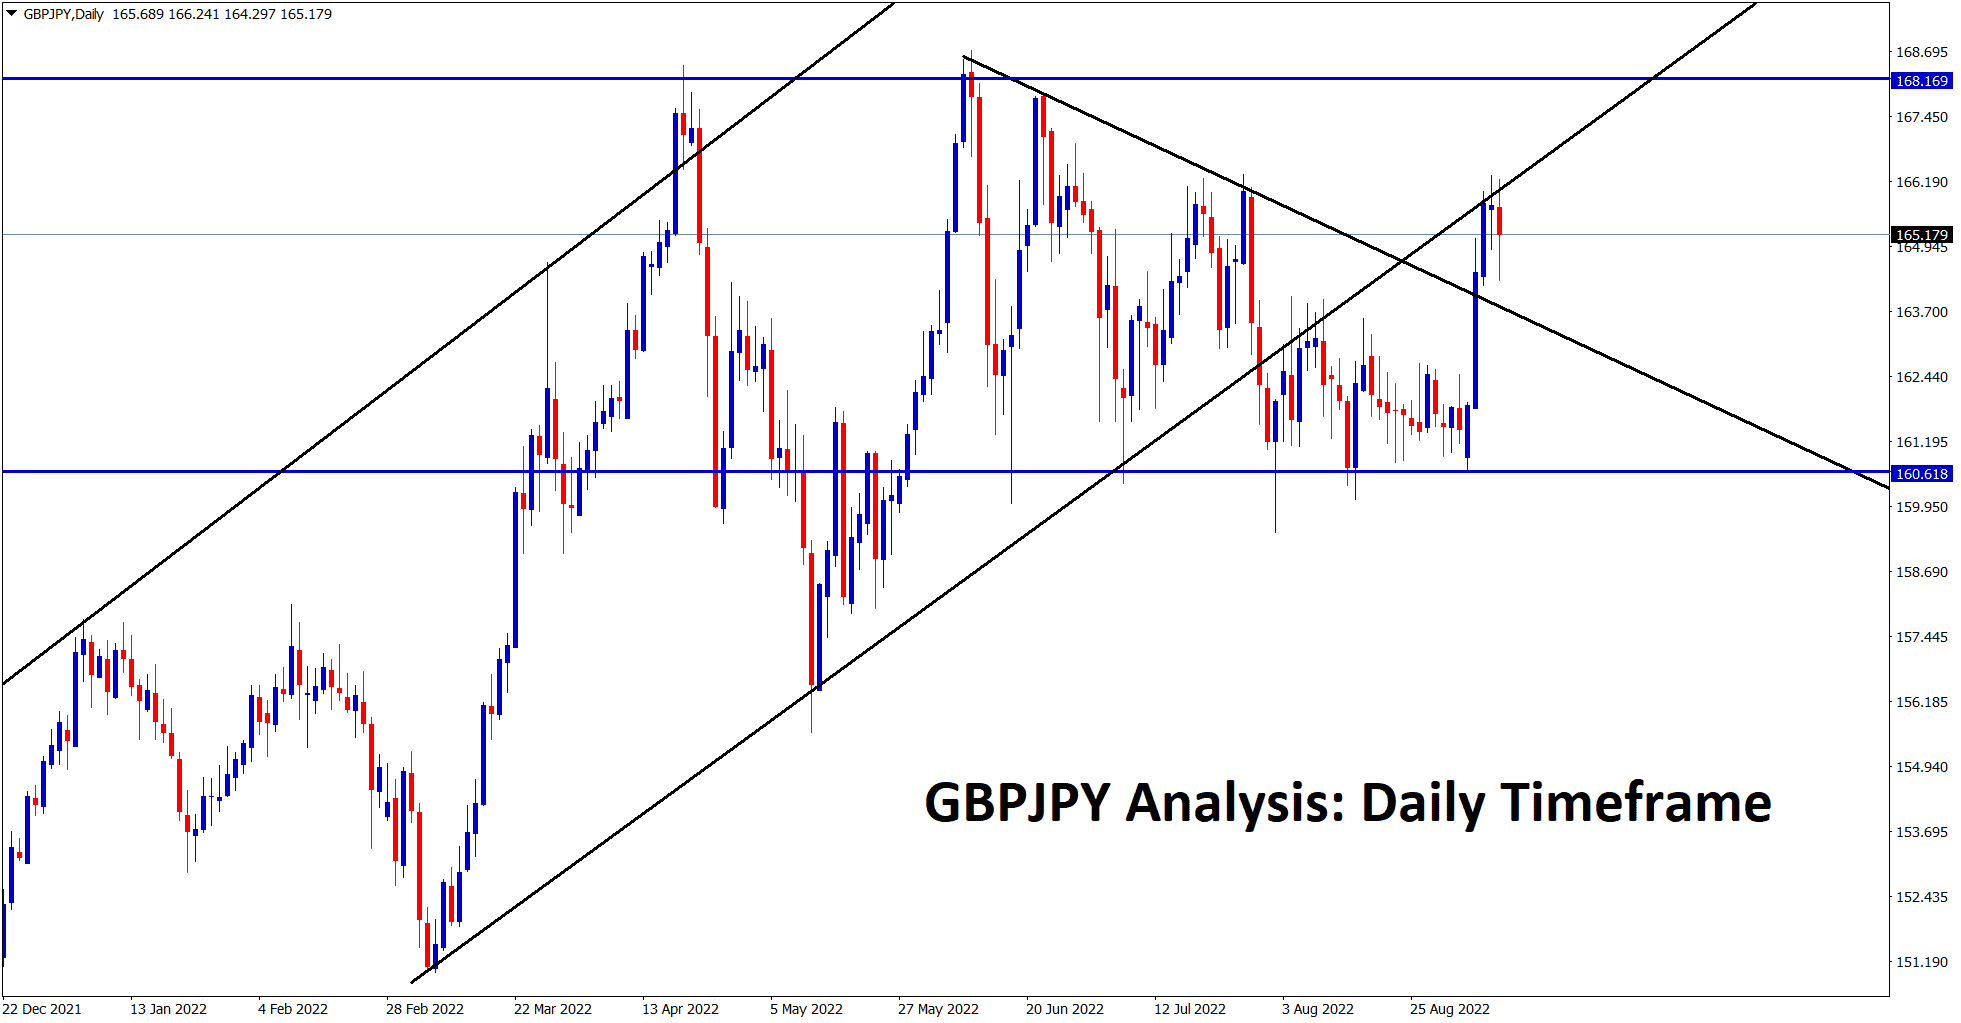 GBPJPY broken the top of the descending triangle